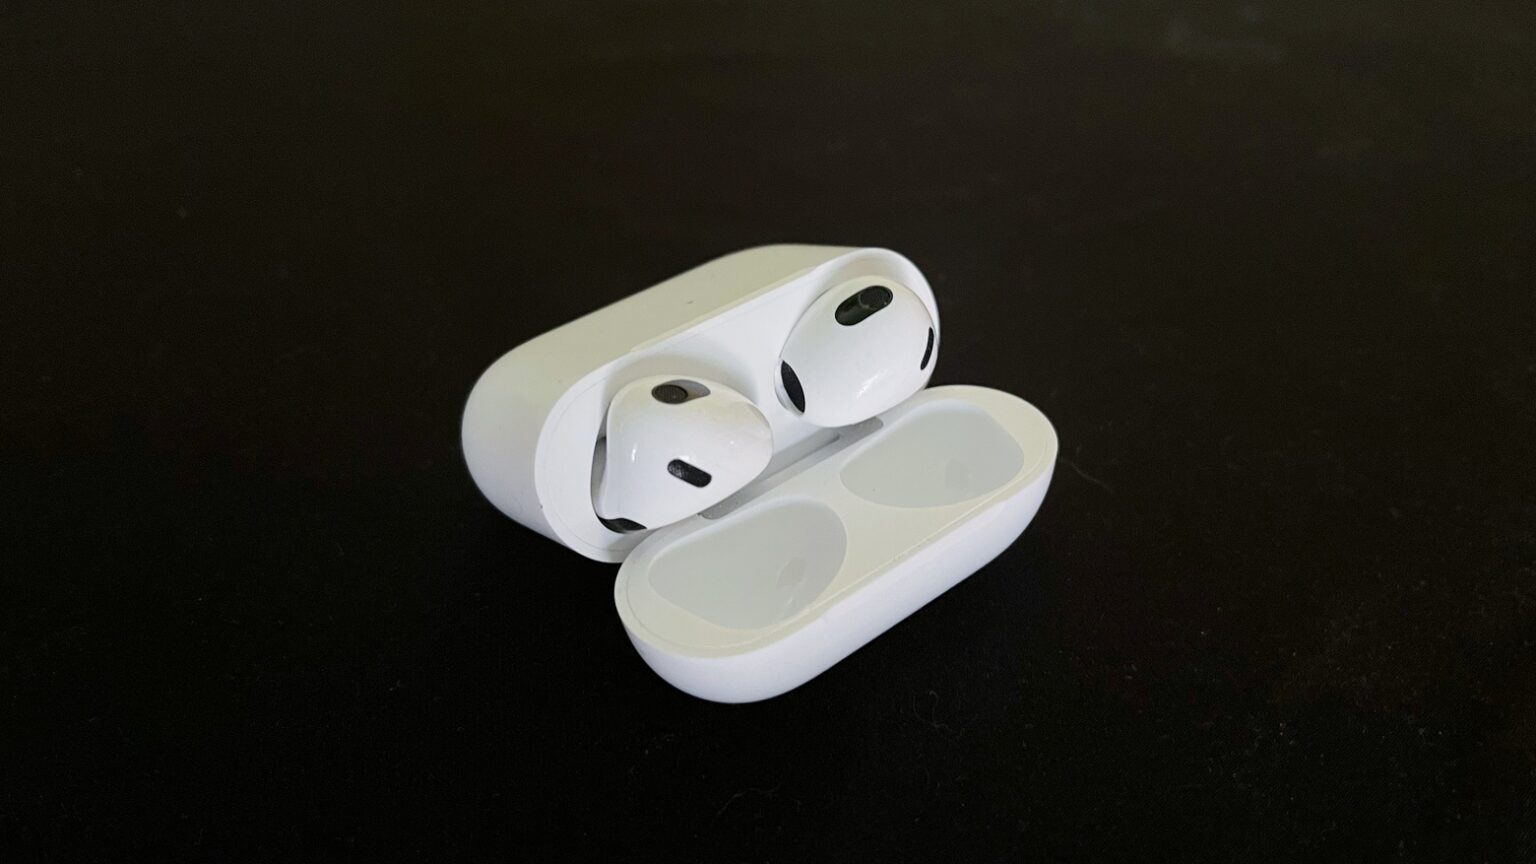 Apple needs to take the frustration out of AirPods firmware updates